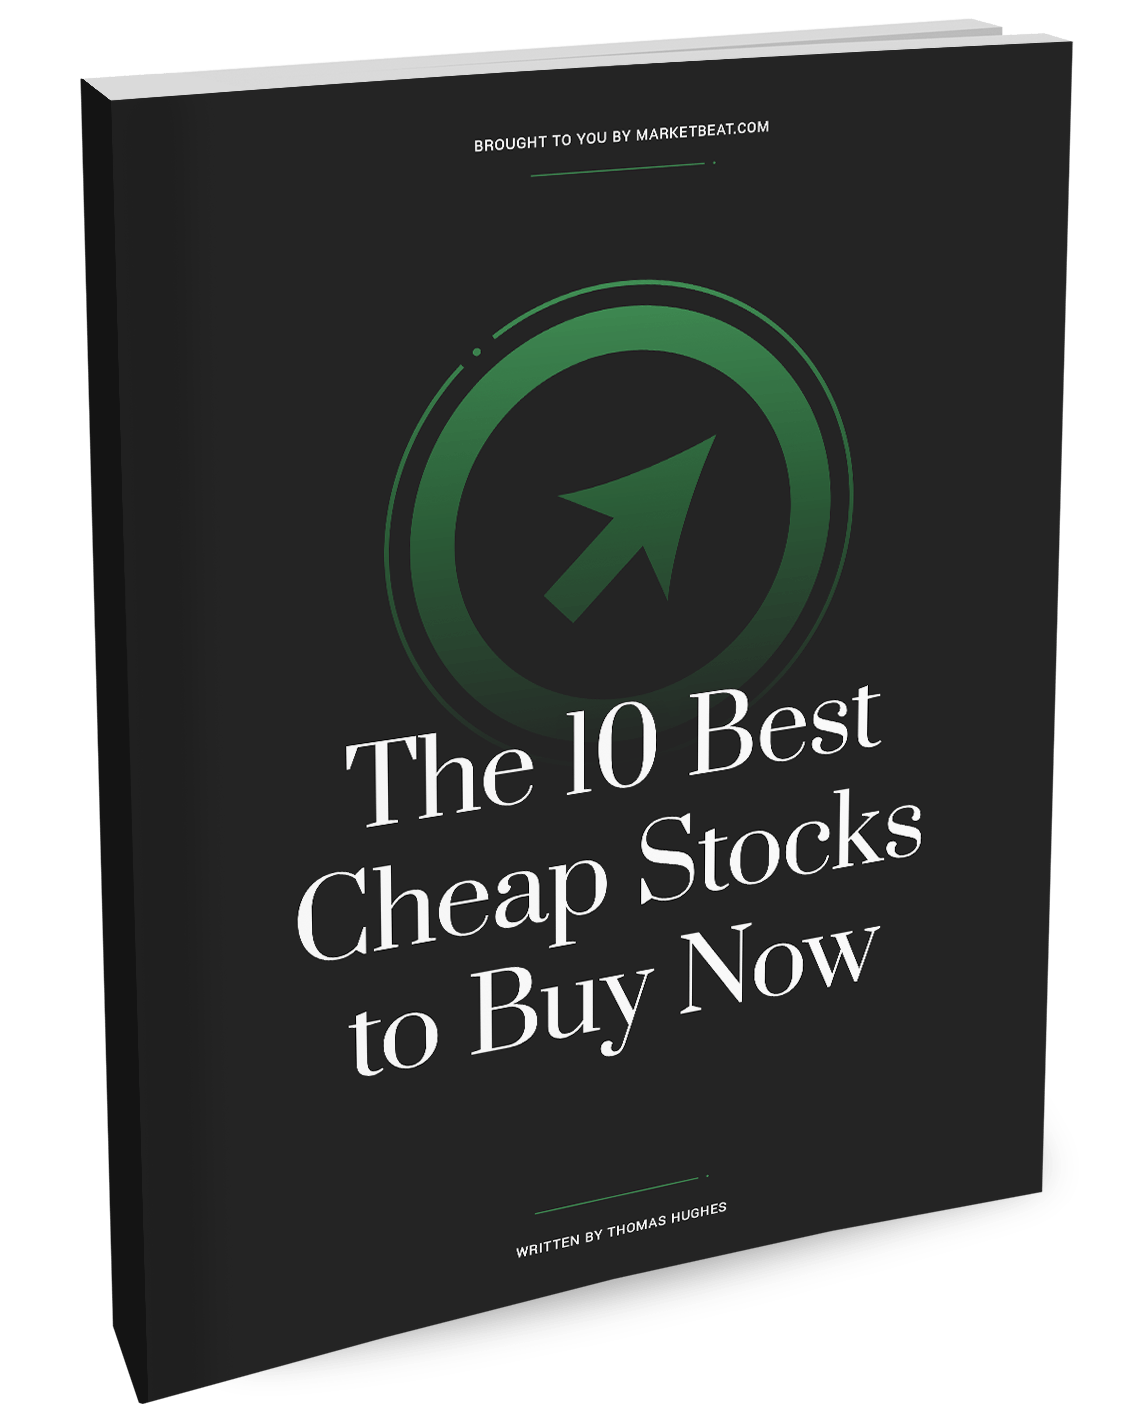 10 Best Cheap Stock Covers to Buy Now